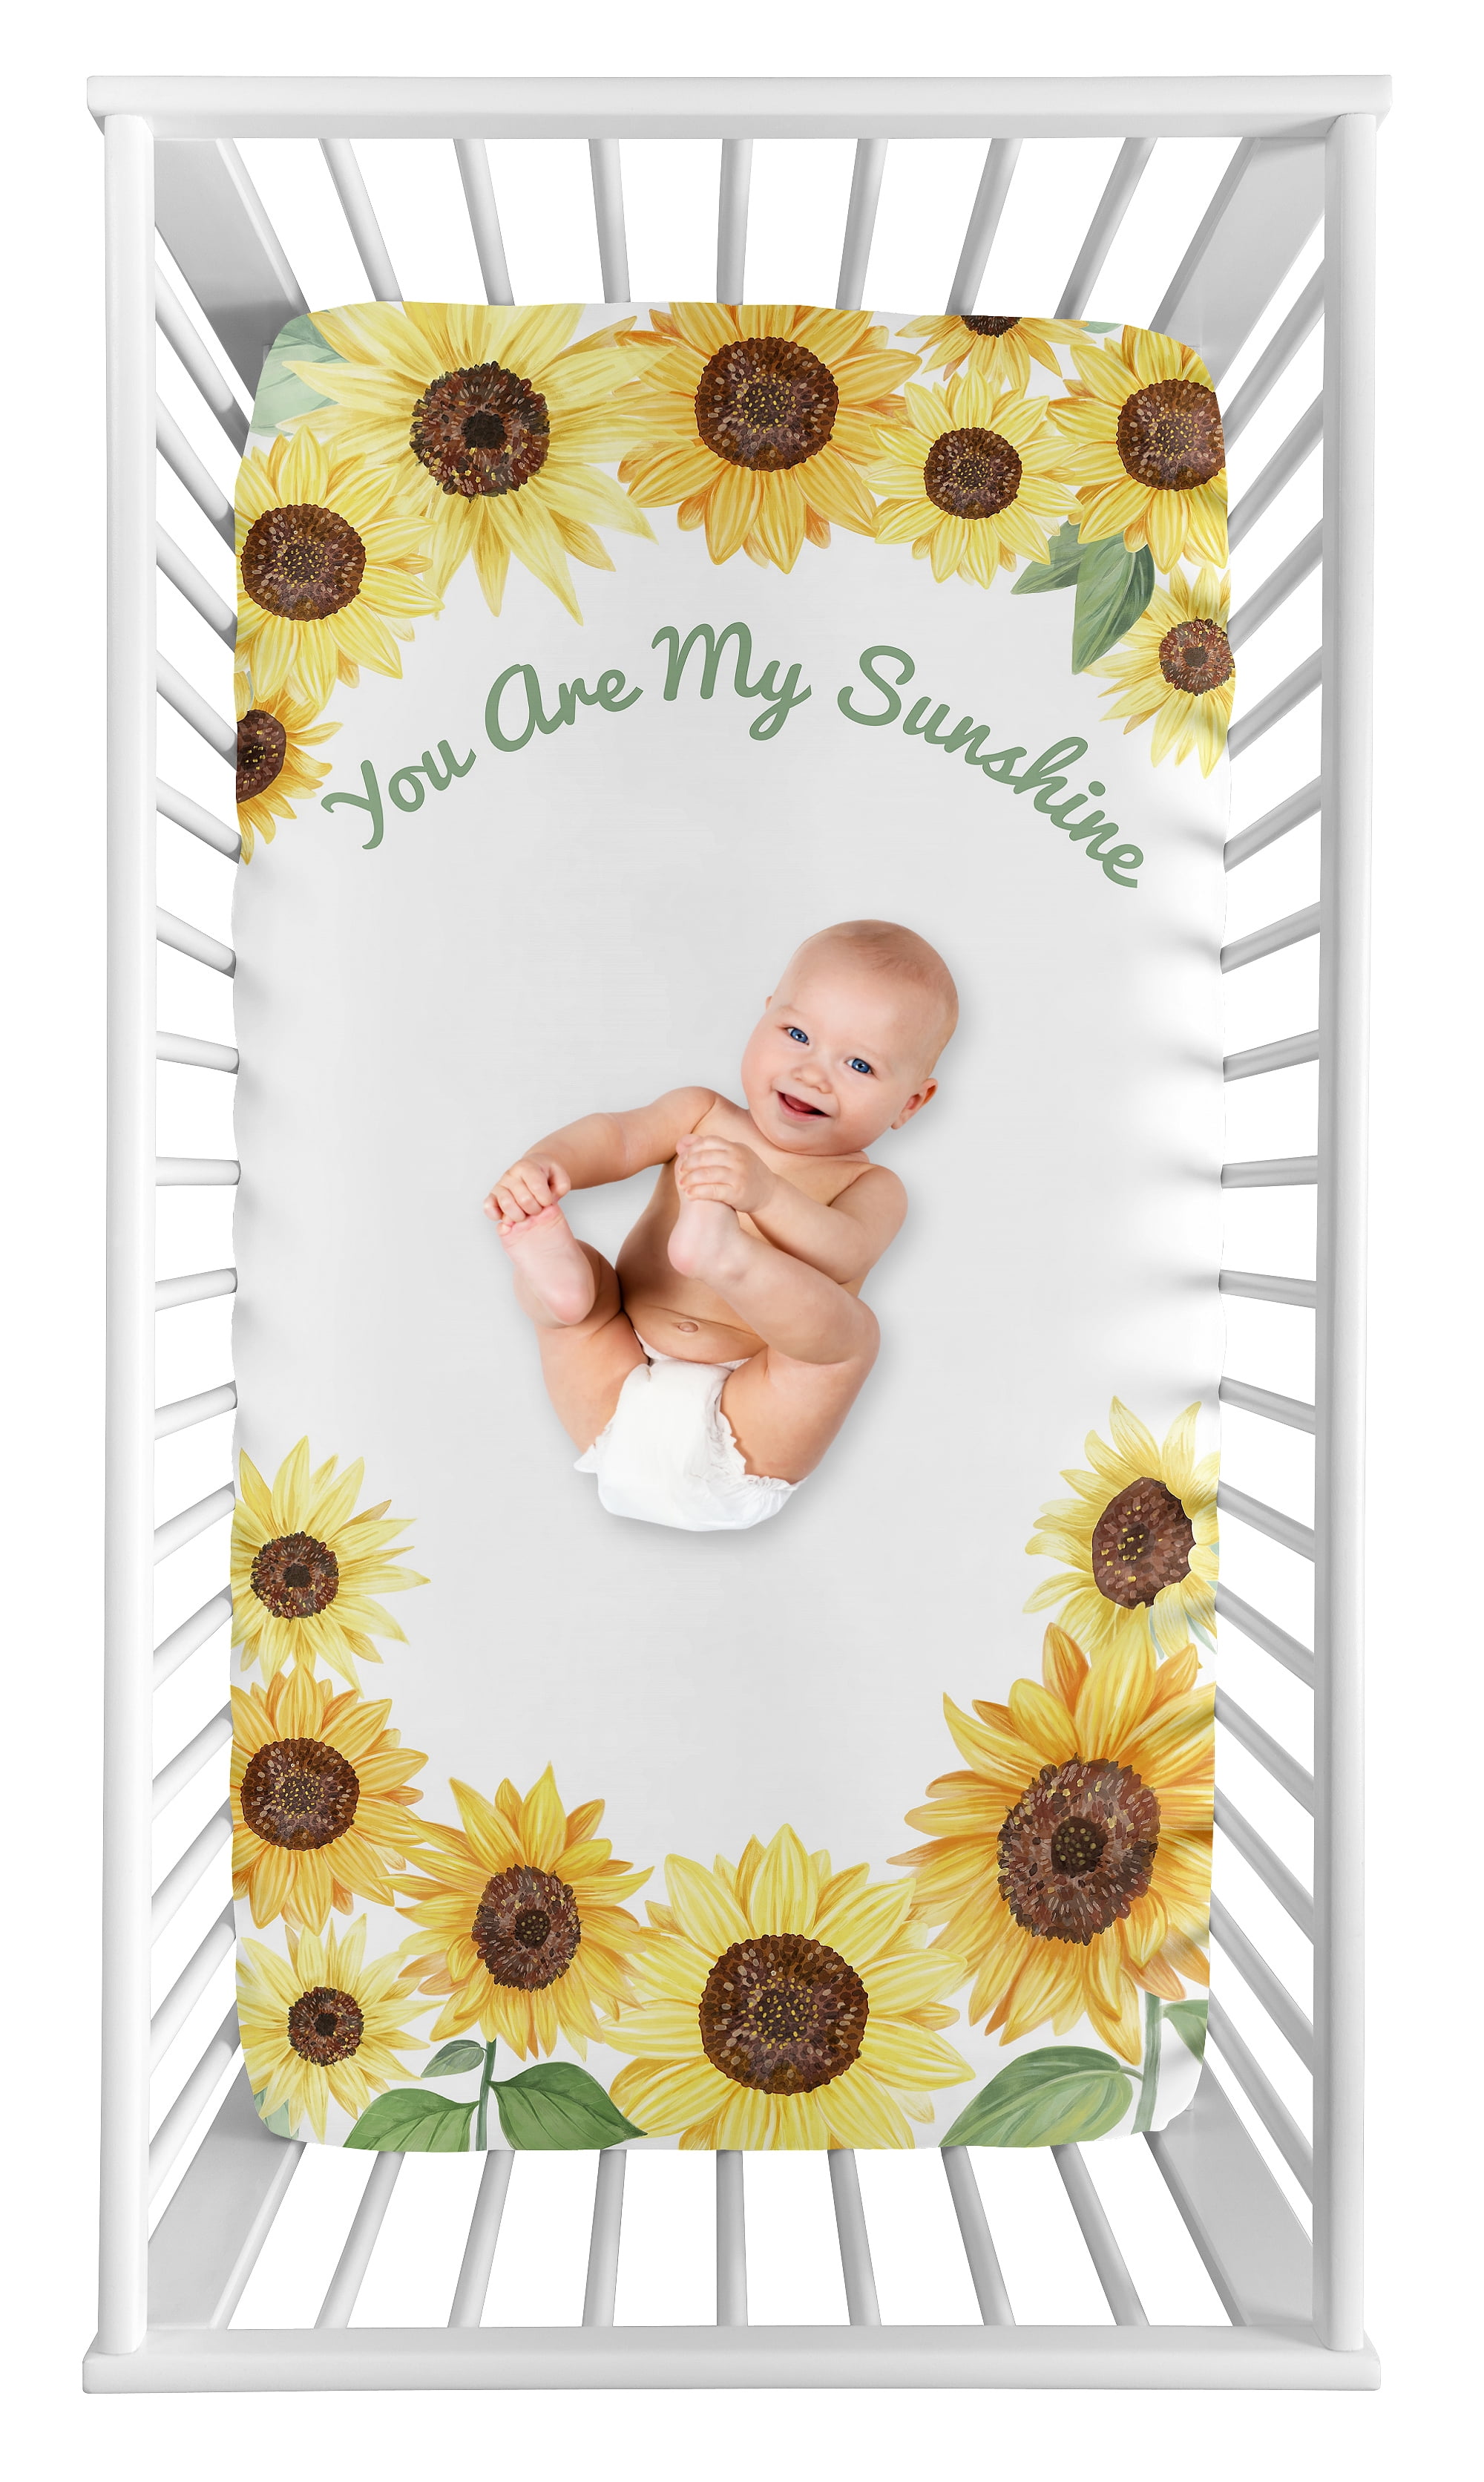 Yellow/Green and White Sunflower Boho Floral Sweet Jojo Designs Baby Kid Clothes Laundry Hamper Farmhouse Watercolor Flower 